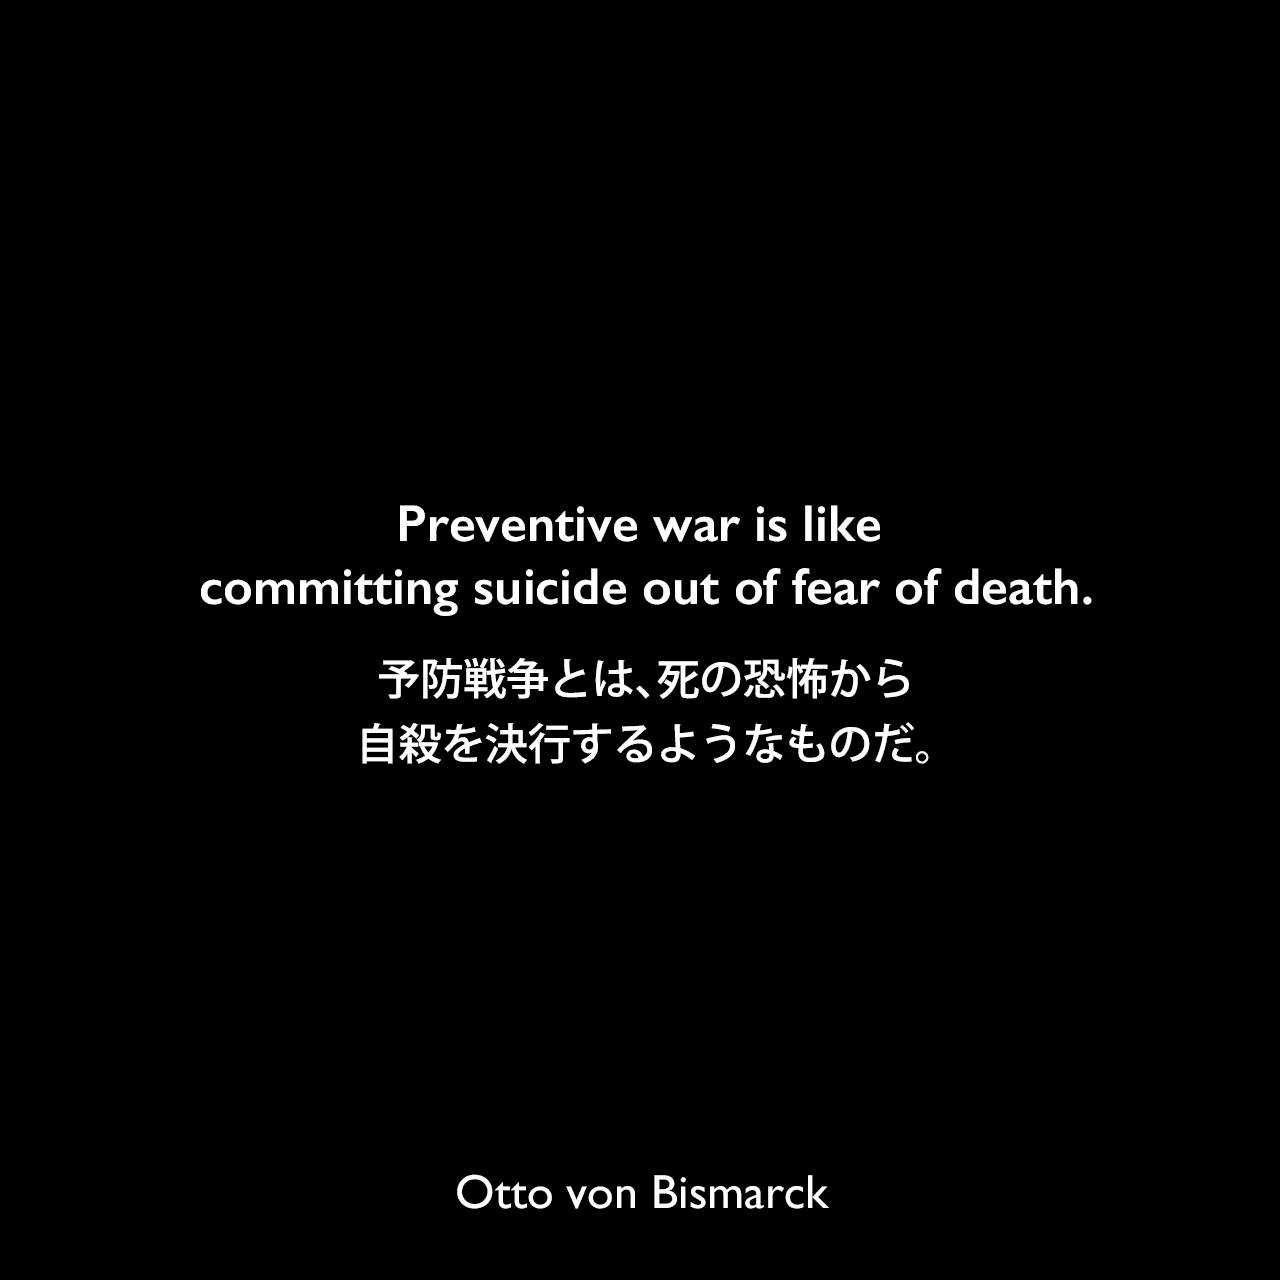 Preventive war is like committing suicide out of fear of death.予防戦争とは、死の恐怖から自殺を決行するようなものだ。Otto von Bismarck